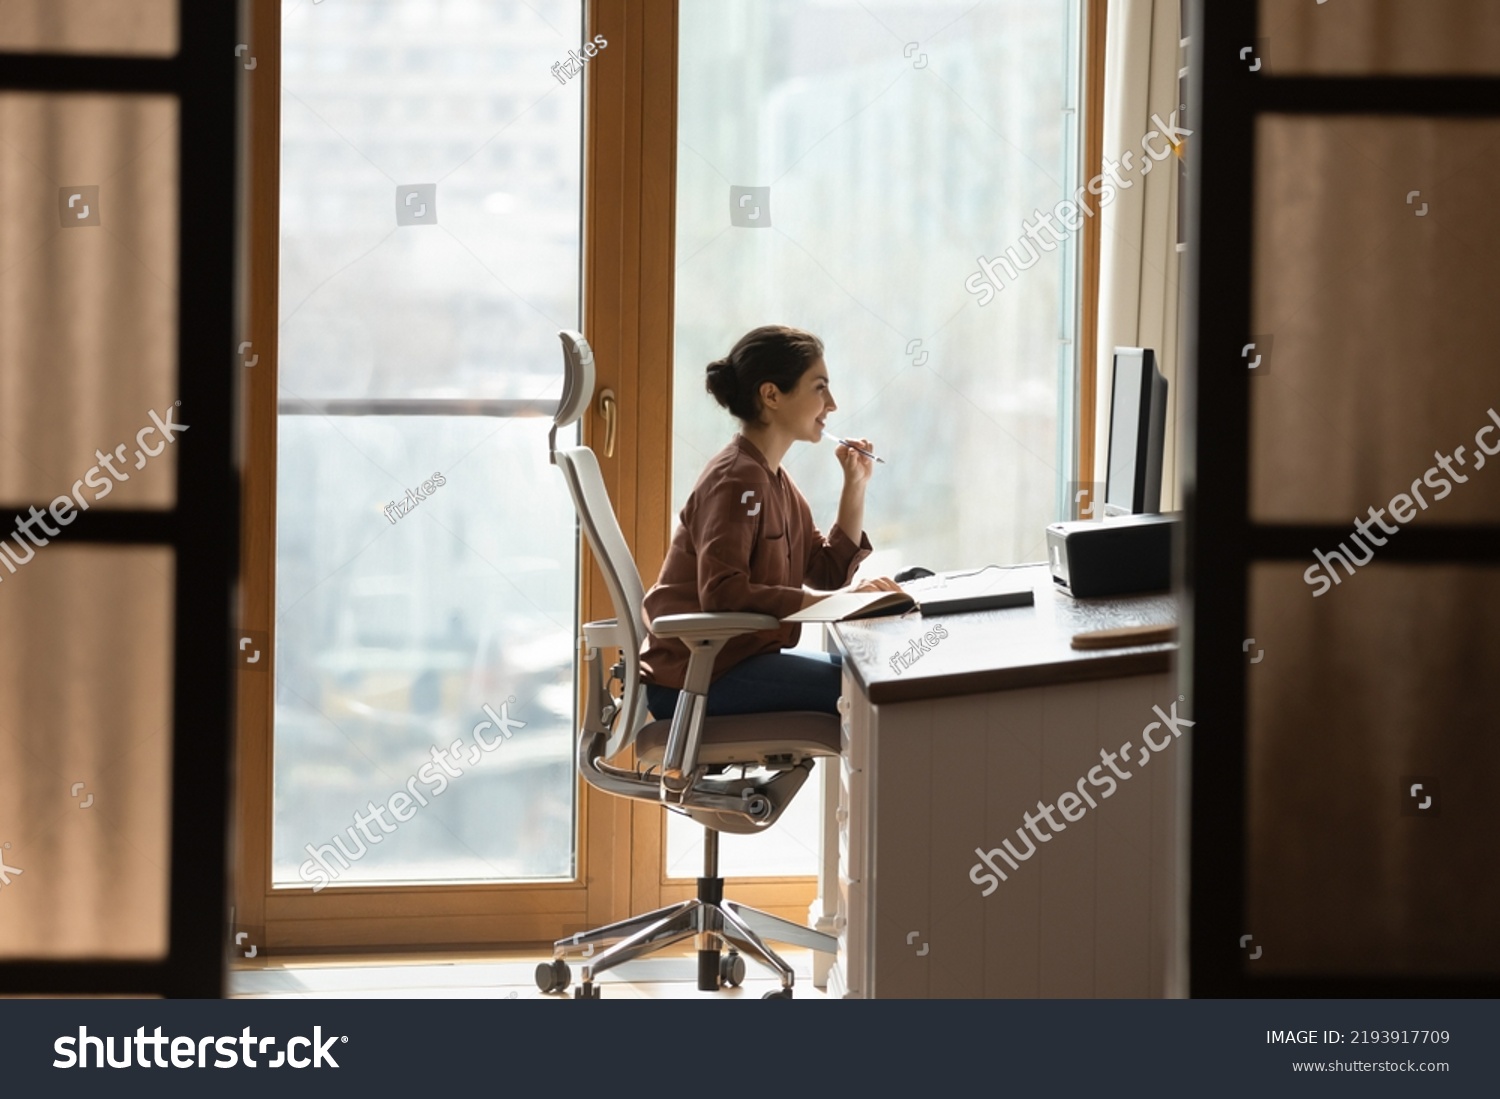 Working at modern home office. Young female architect interior designer sit at desk on ergonomic chair doing job project on desktop pc. Millennial indian woman study at domestic workplace #2193917709